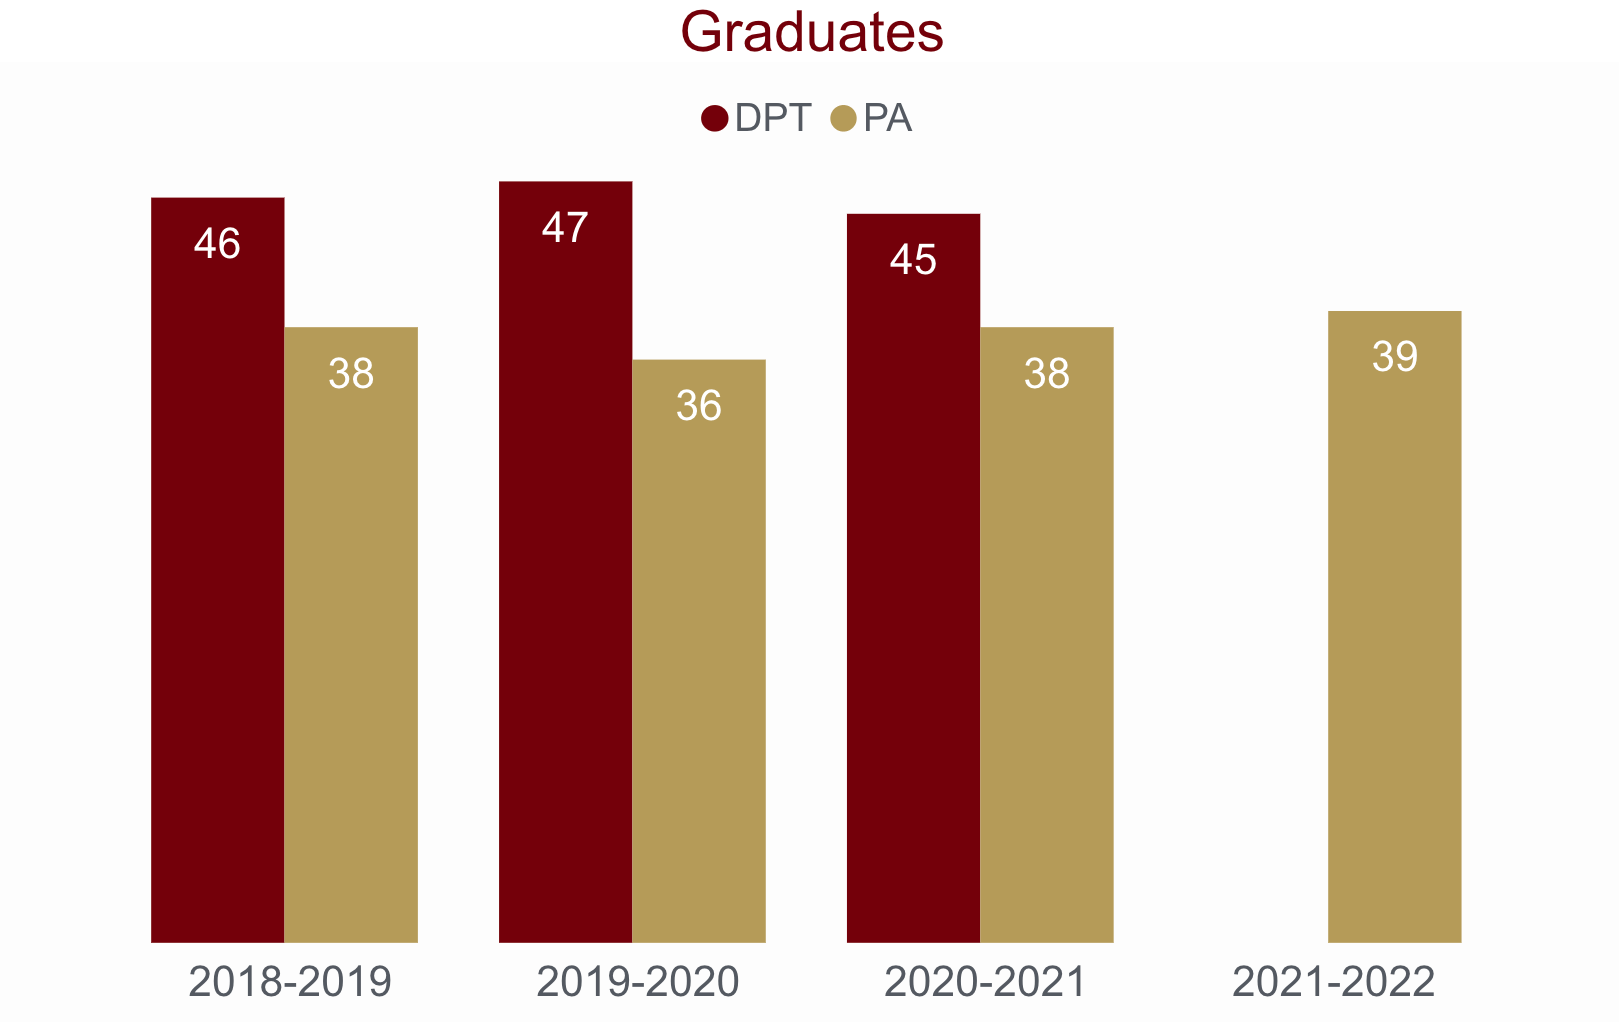 Bar chart showing the number of health sciences graduates